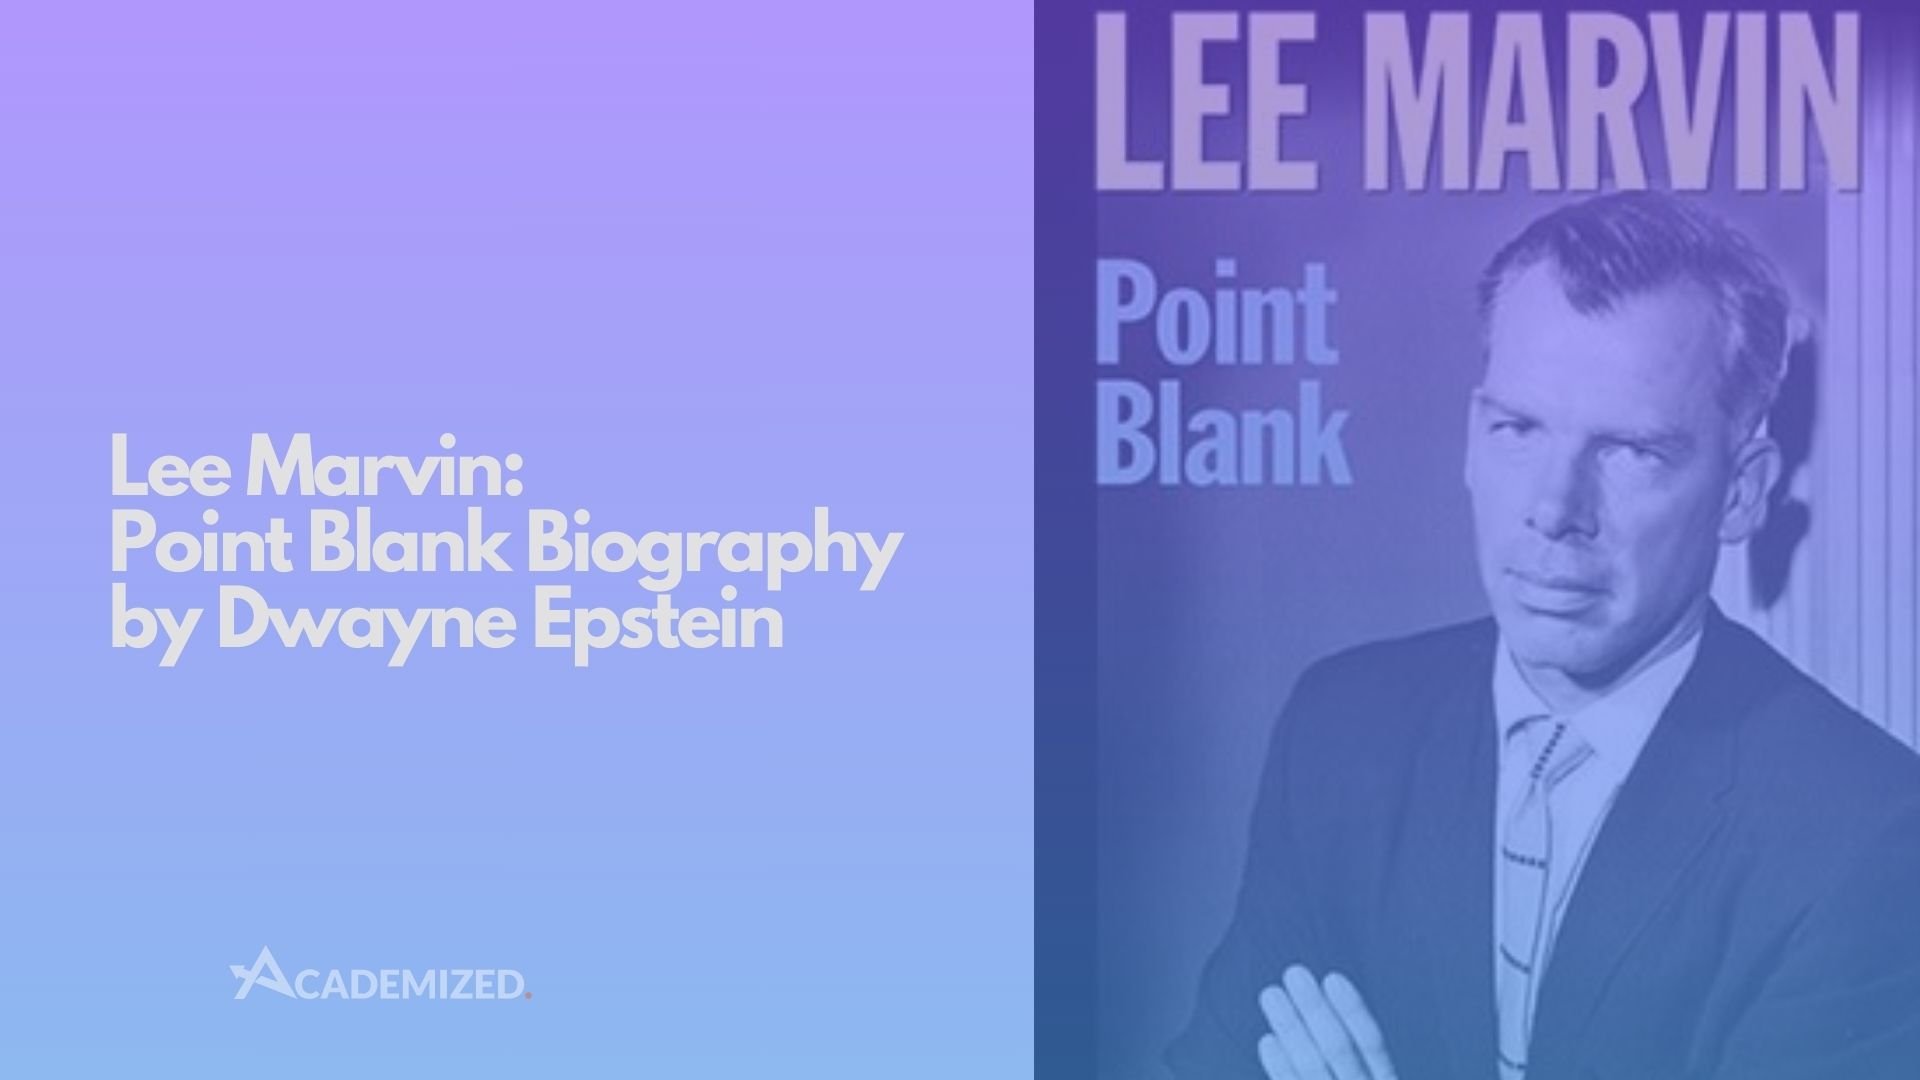 Lee Marvin: Point Blank Biography by Dwayne Epstein